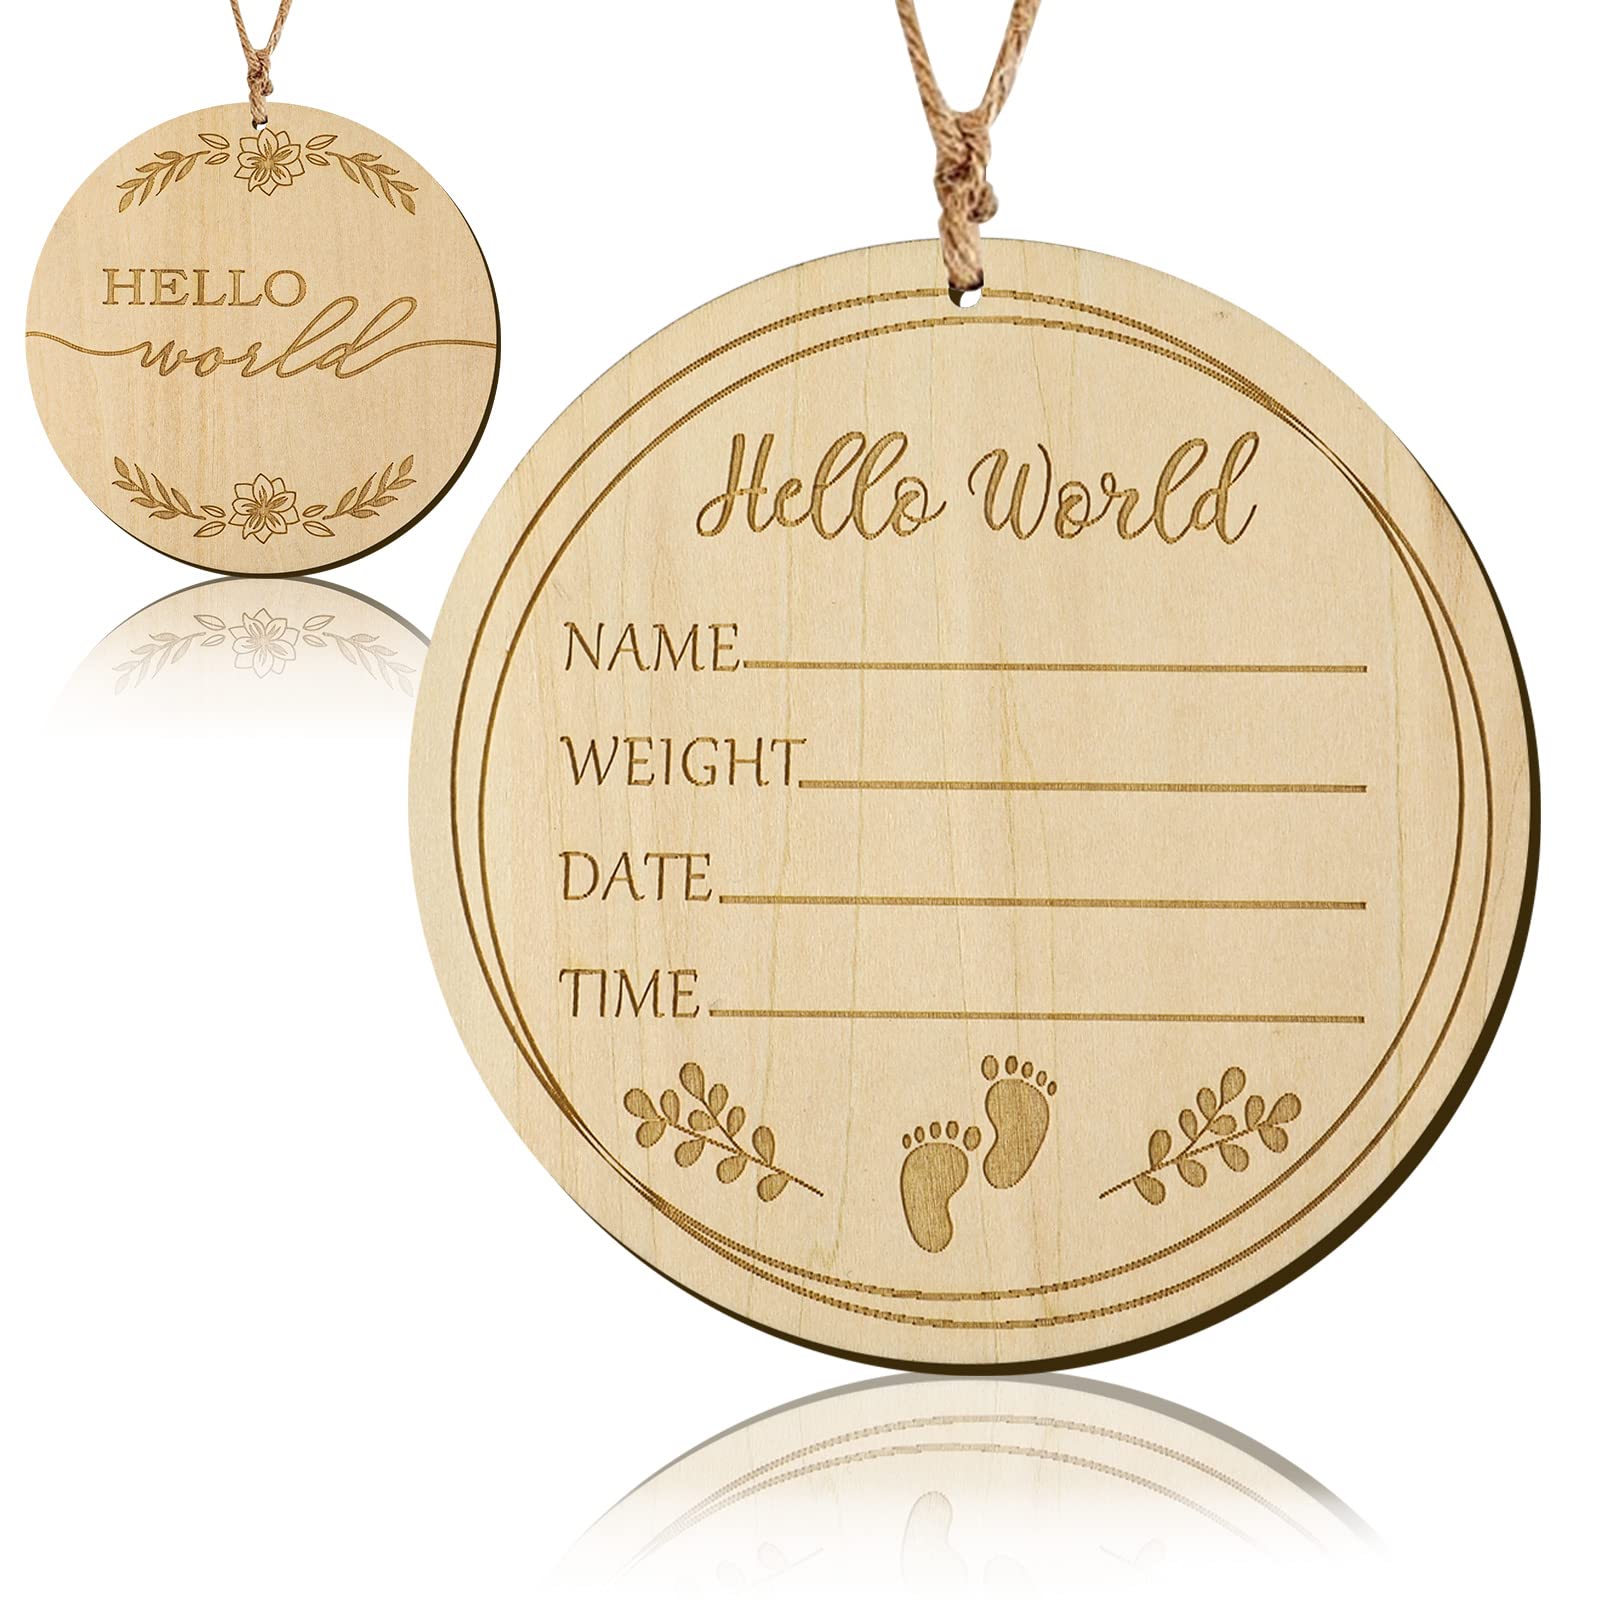 LUTER Baby Announcement Sign, 3.9 inch Hello World Welcome Name Sign with a Hemp Rope Round Wooden Milestone Baby Announcement Plaque for Newborn Photo Props